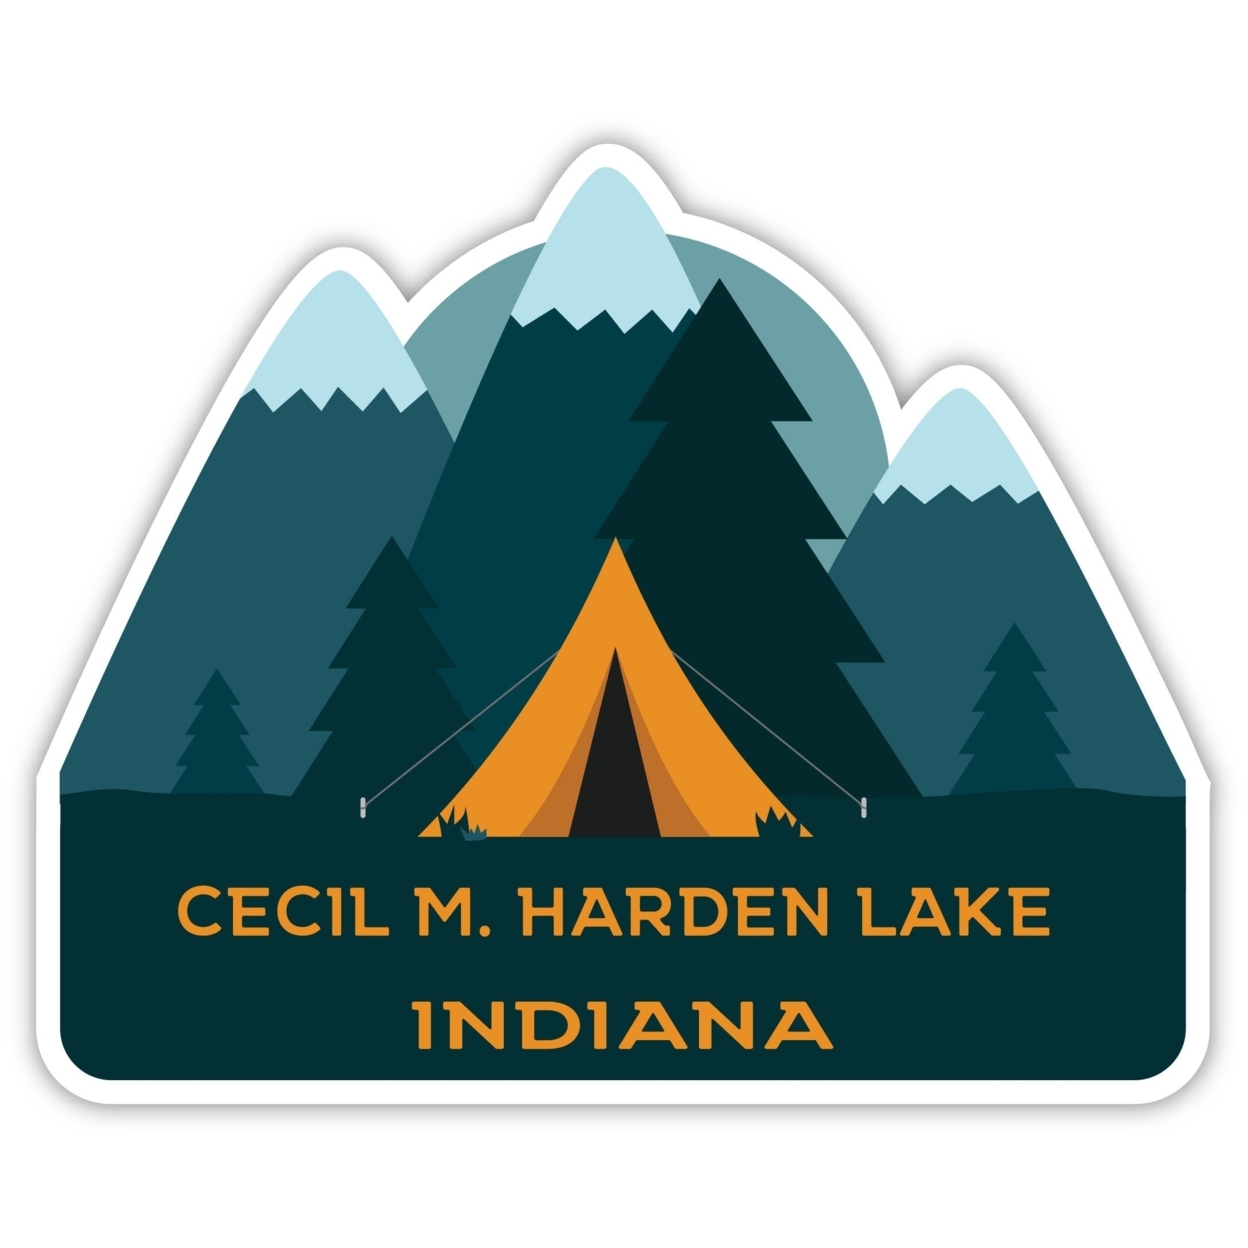 Cecil M. Harden Lake Indiana Souvenir Decorative Stickers (Choose Theme And Size) - 4-Pack, 4-Inch, Tent